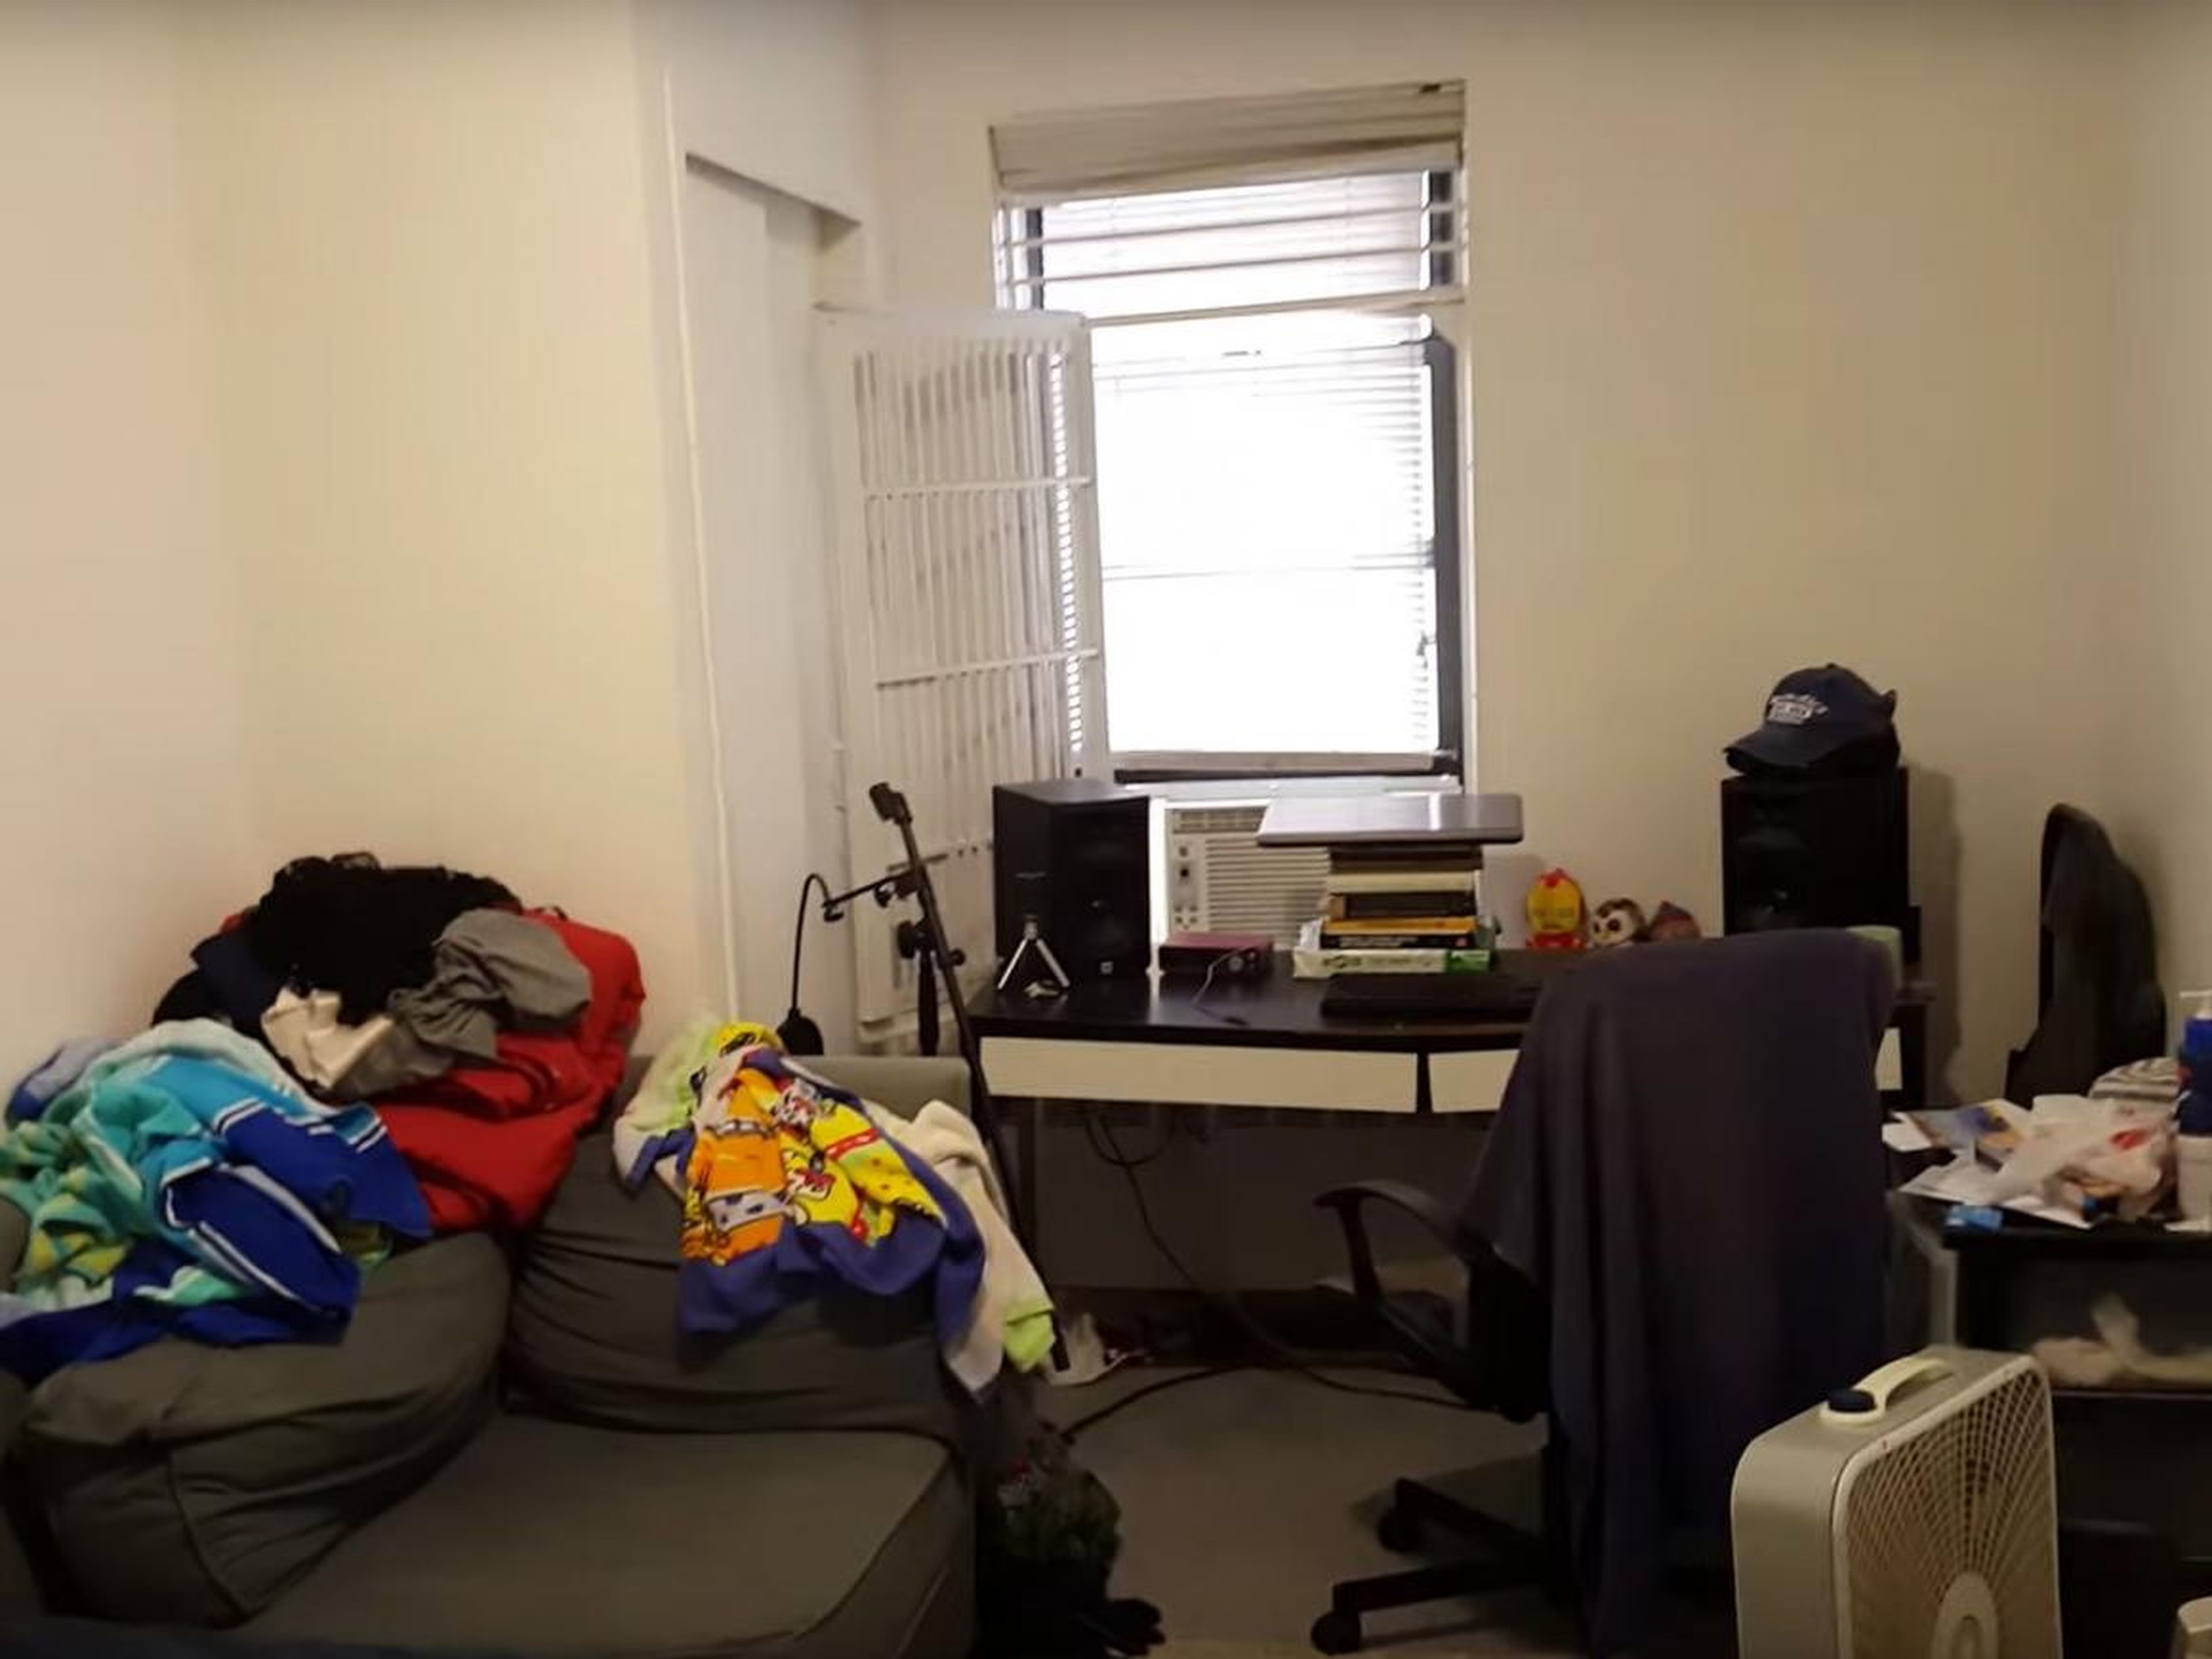 He was working as a software engineer making $150,000 a year in 2016, when he was living in this one-bedroom apartment in the East Village for $2,500 a month.